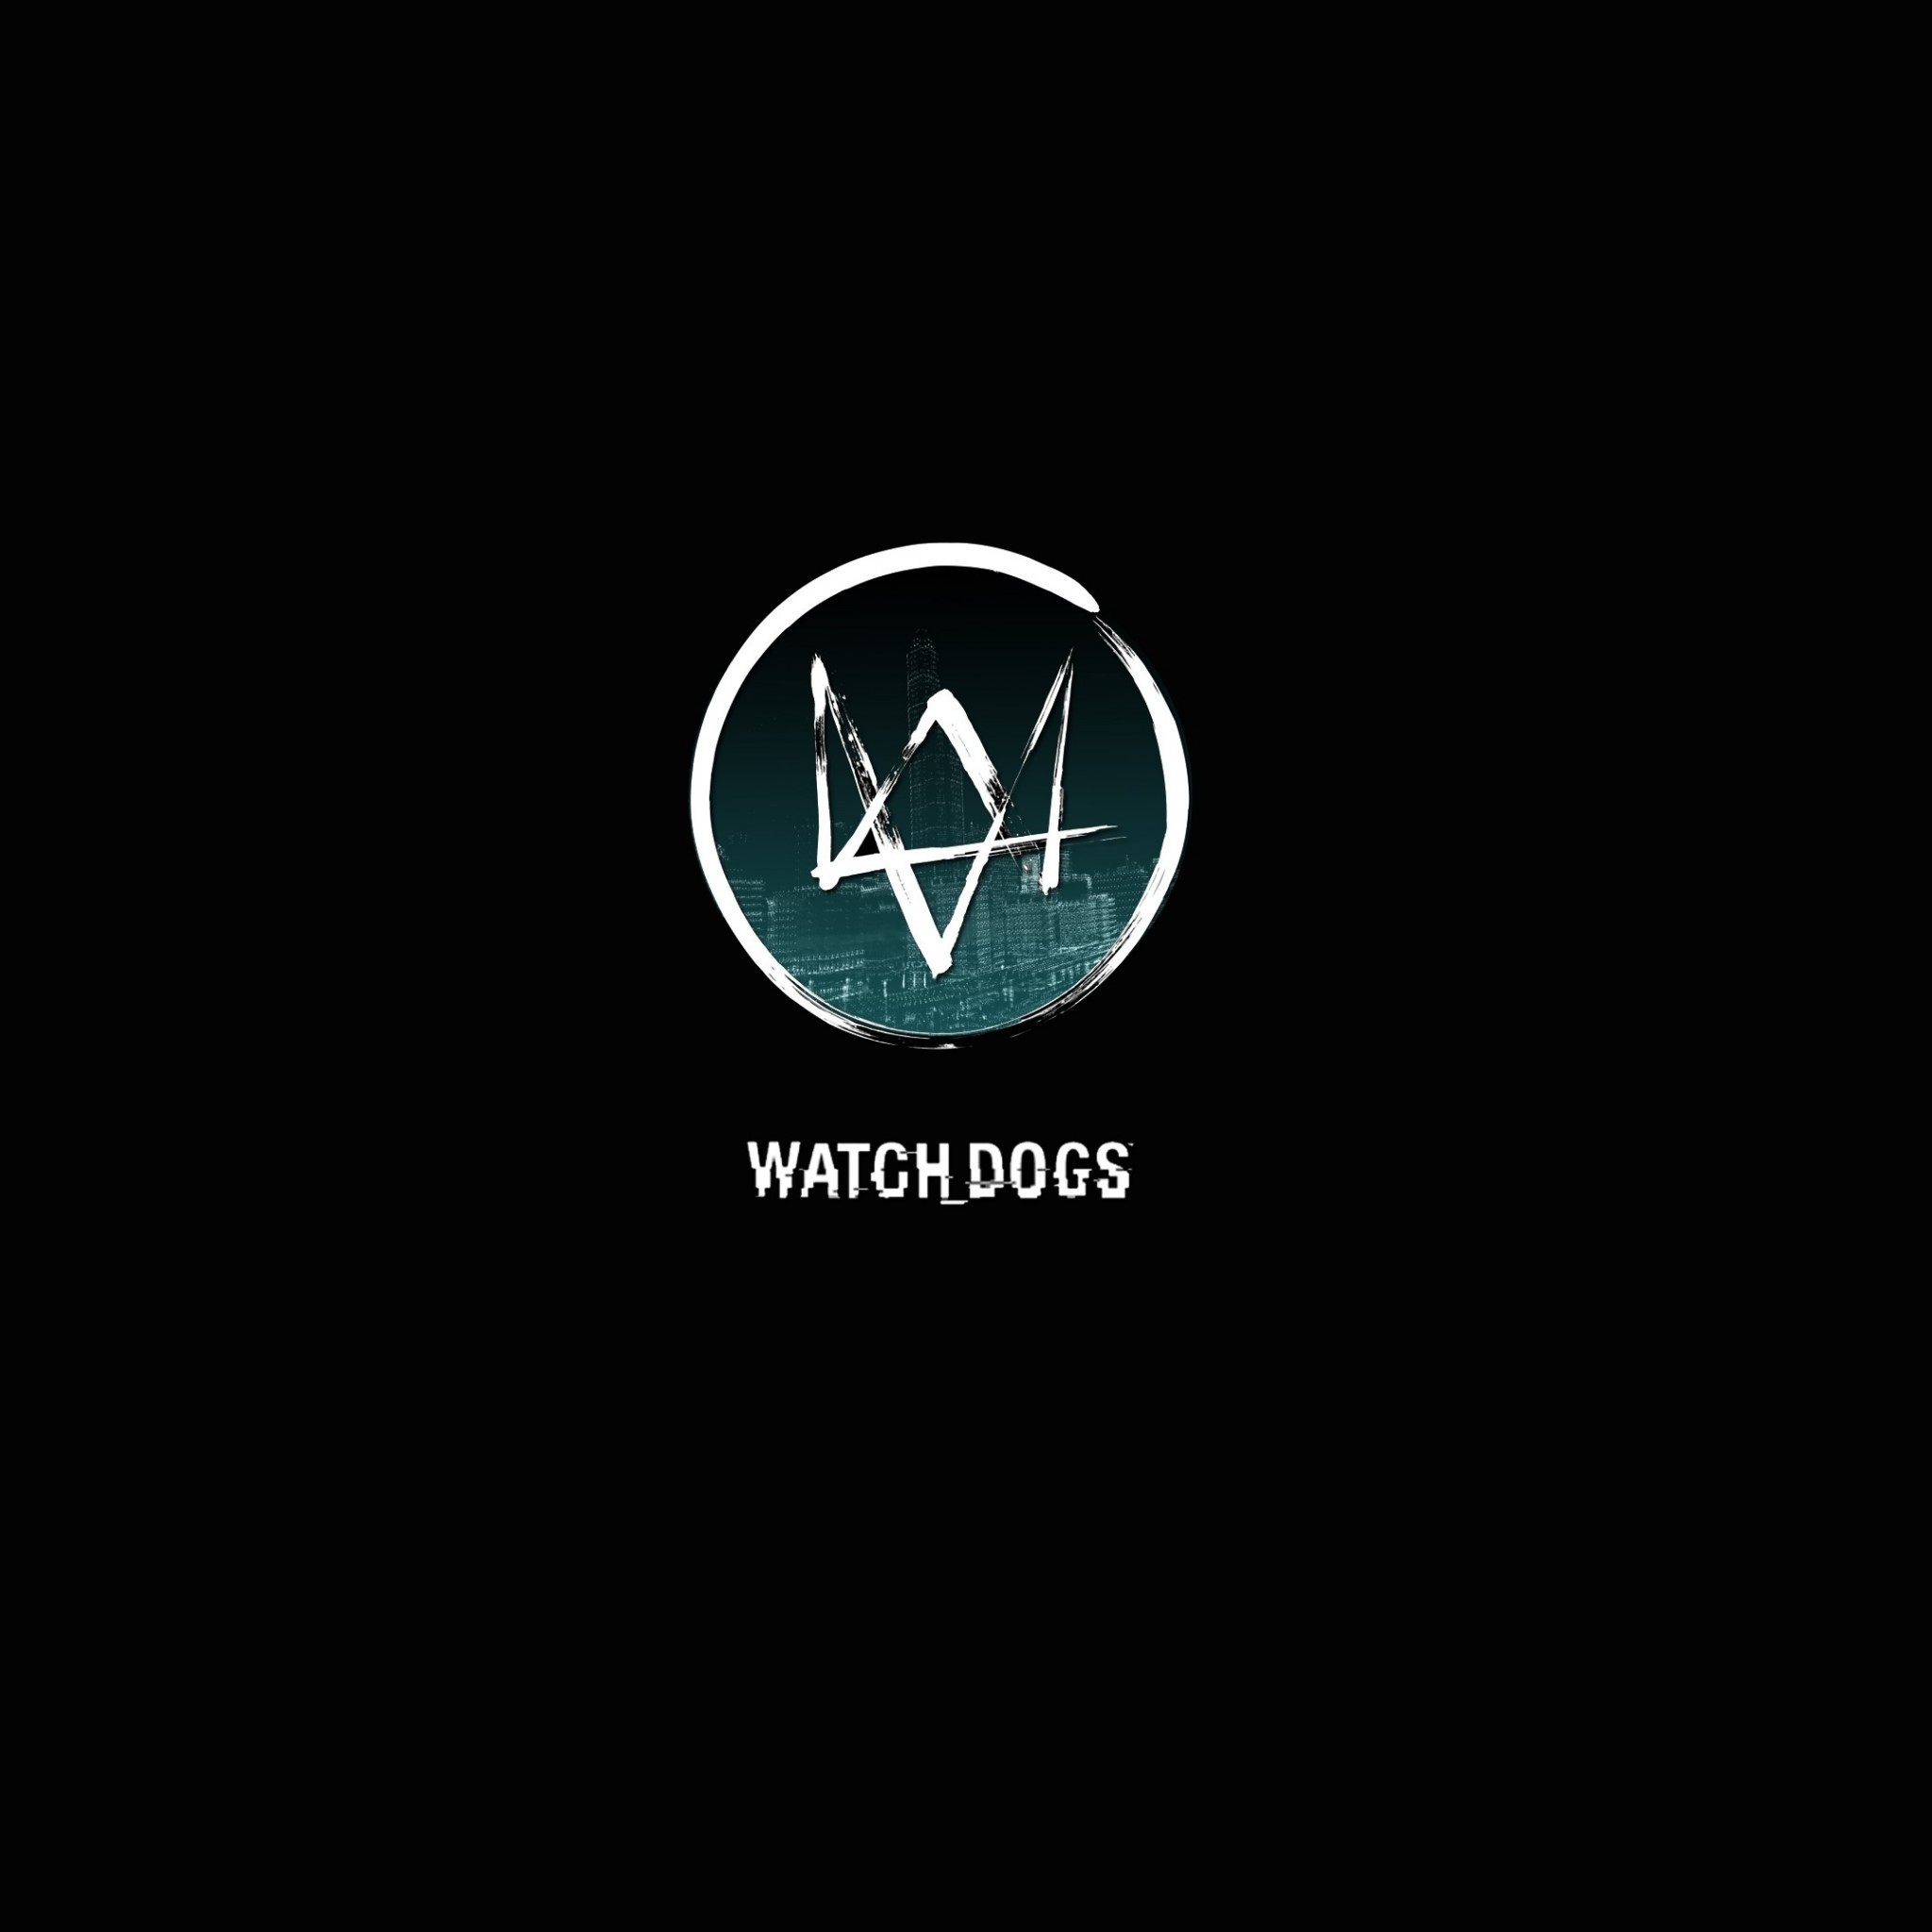 Watch Dogs Logo – Tap to see awesome Watch Dog wallpapers!